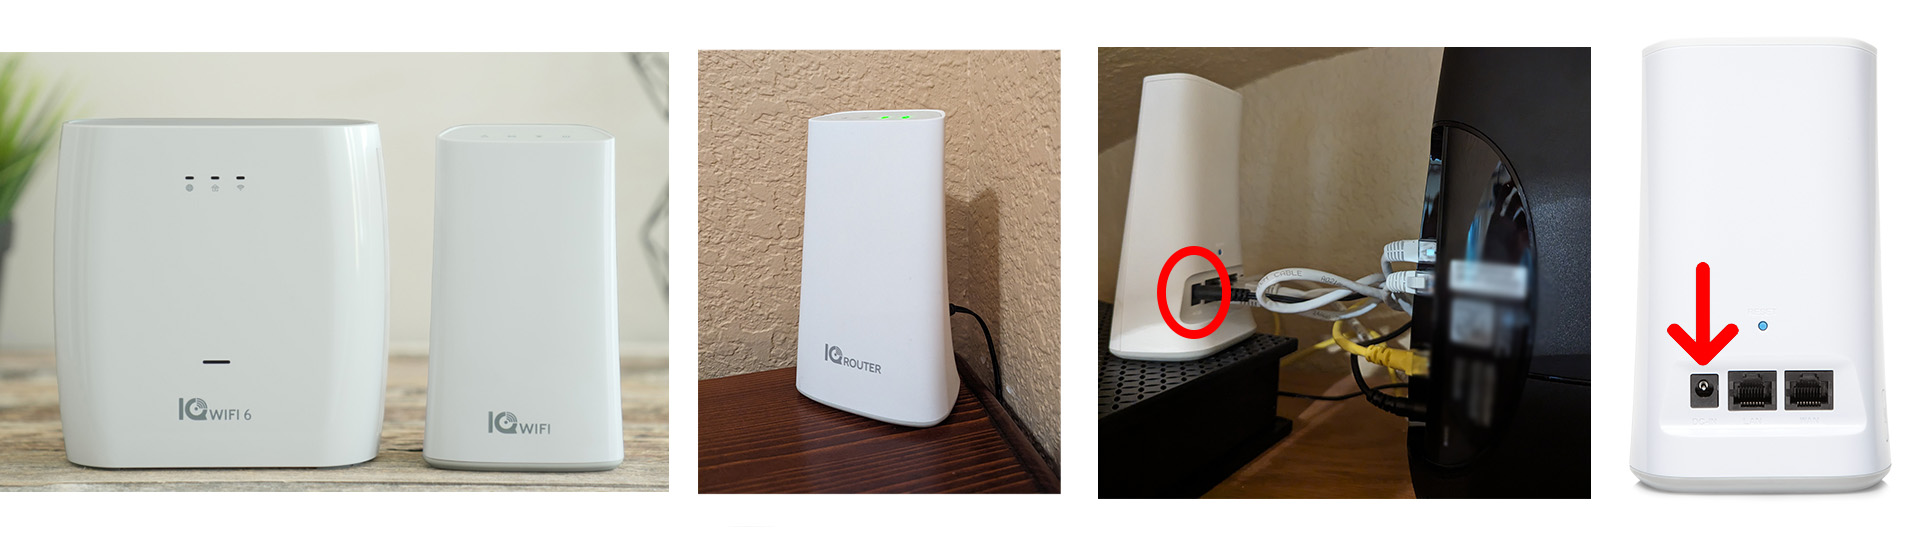 Images of Wi-Fi mesh network towers